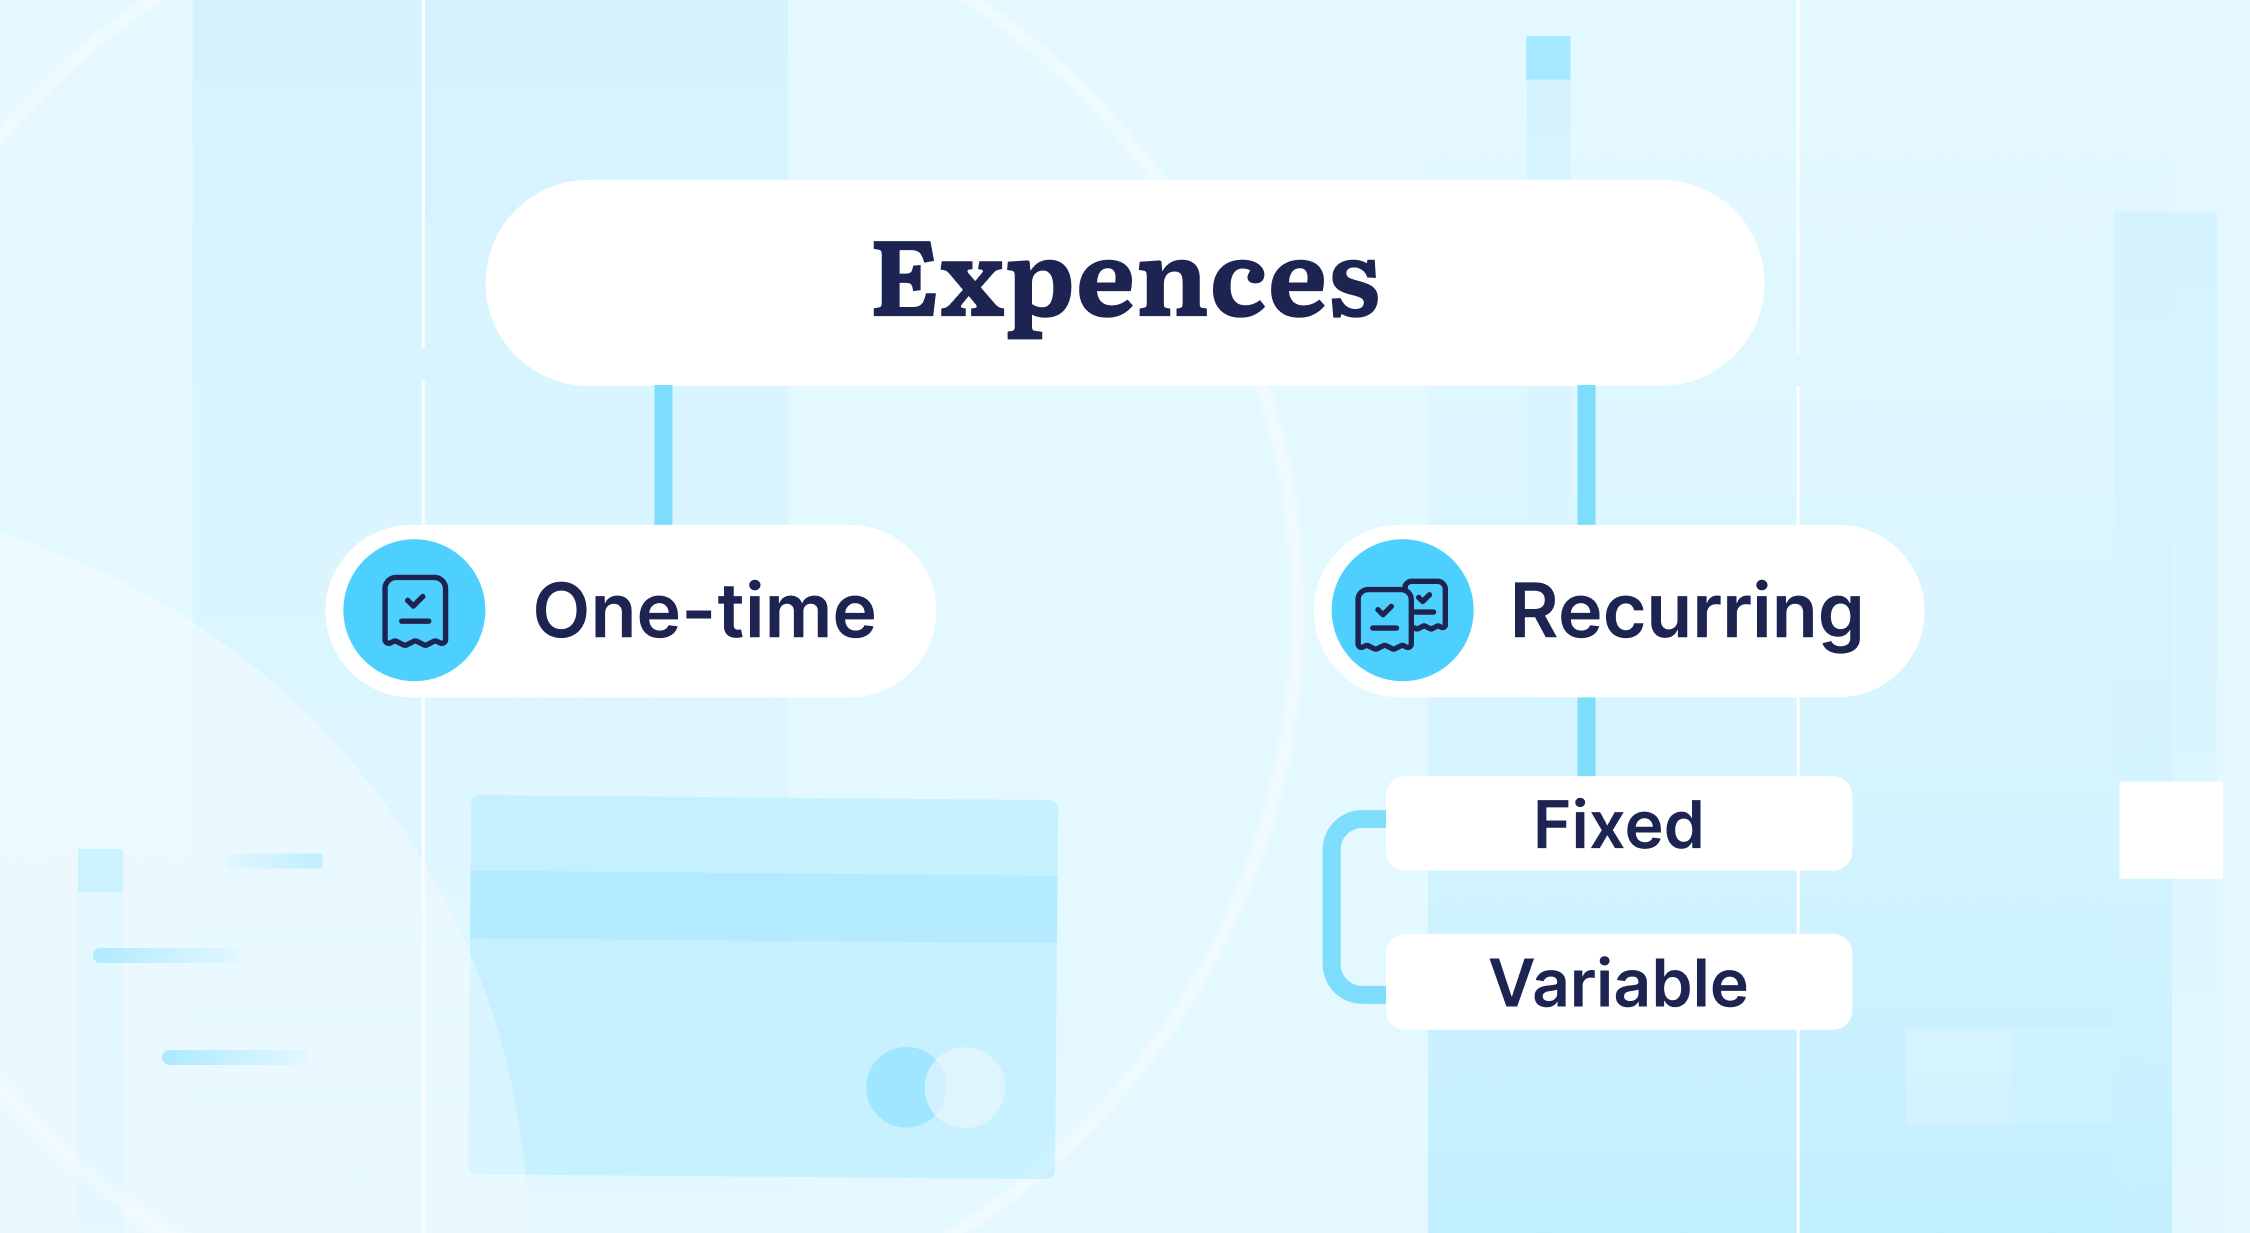 general types of expenses